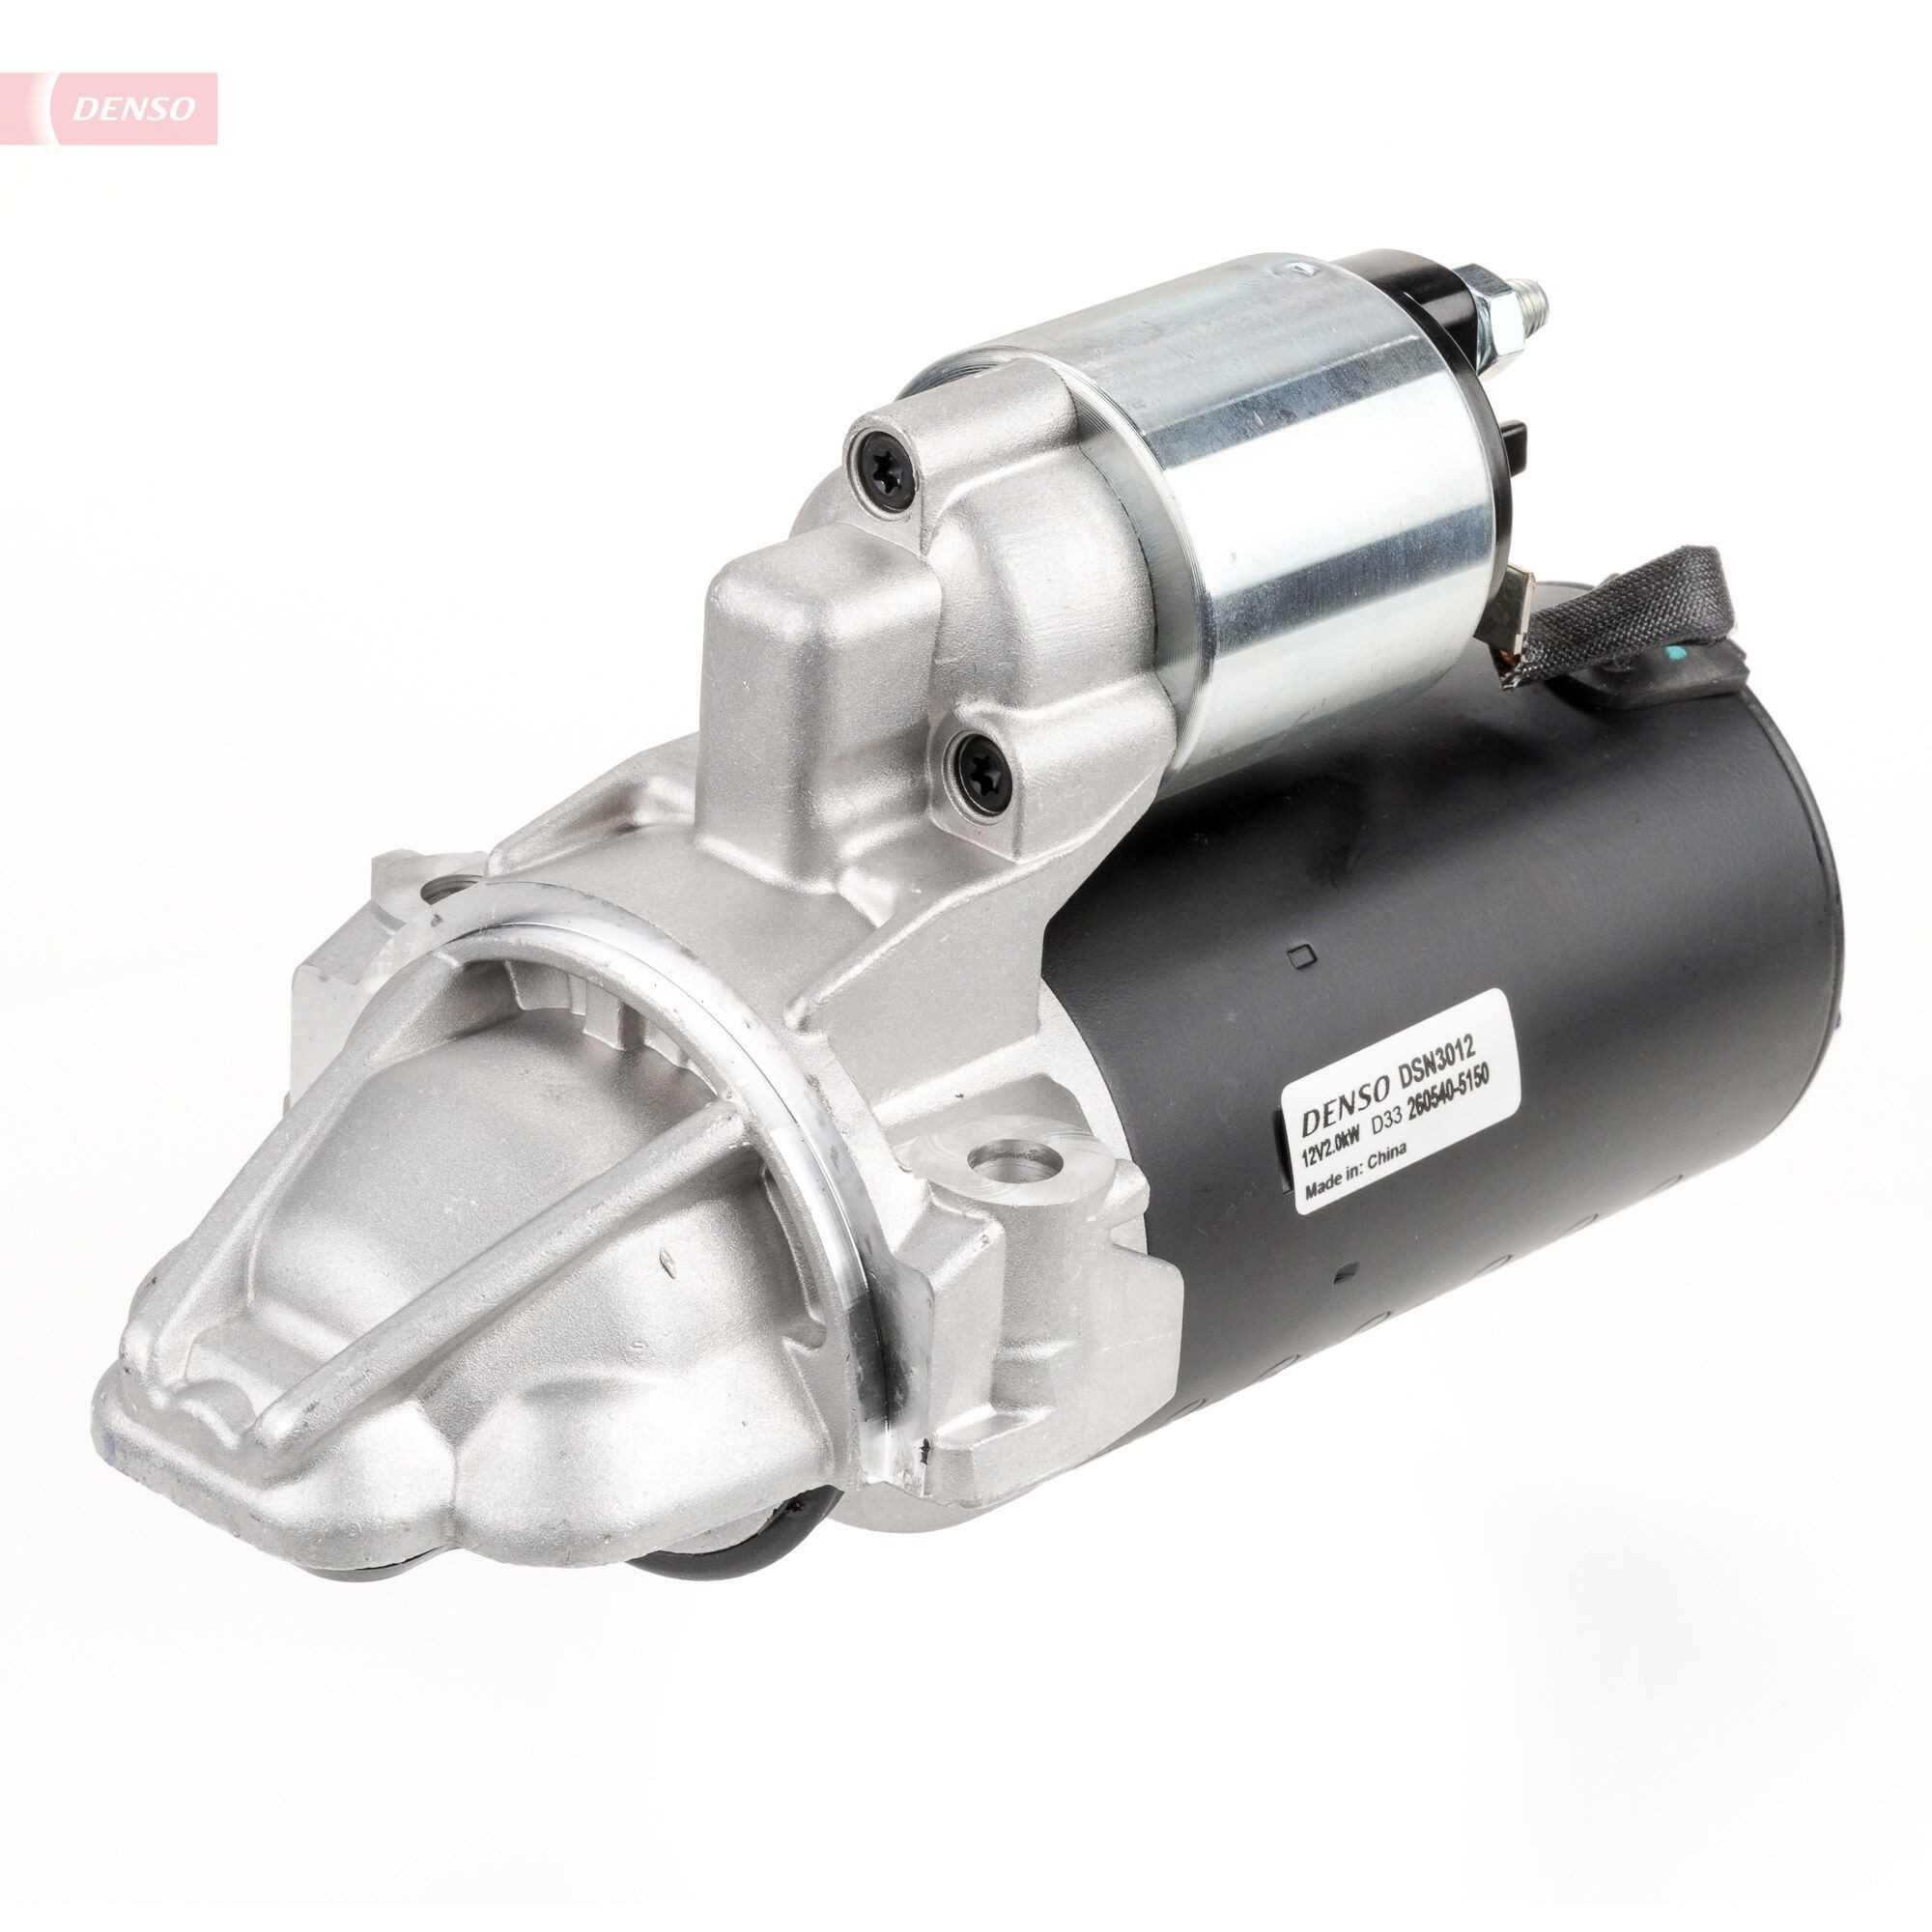 Original DSN3012 DENSO Starter experience and price